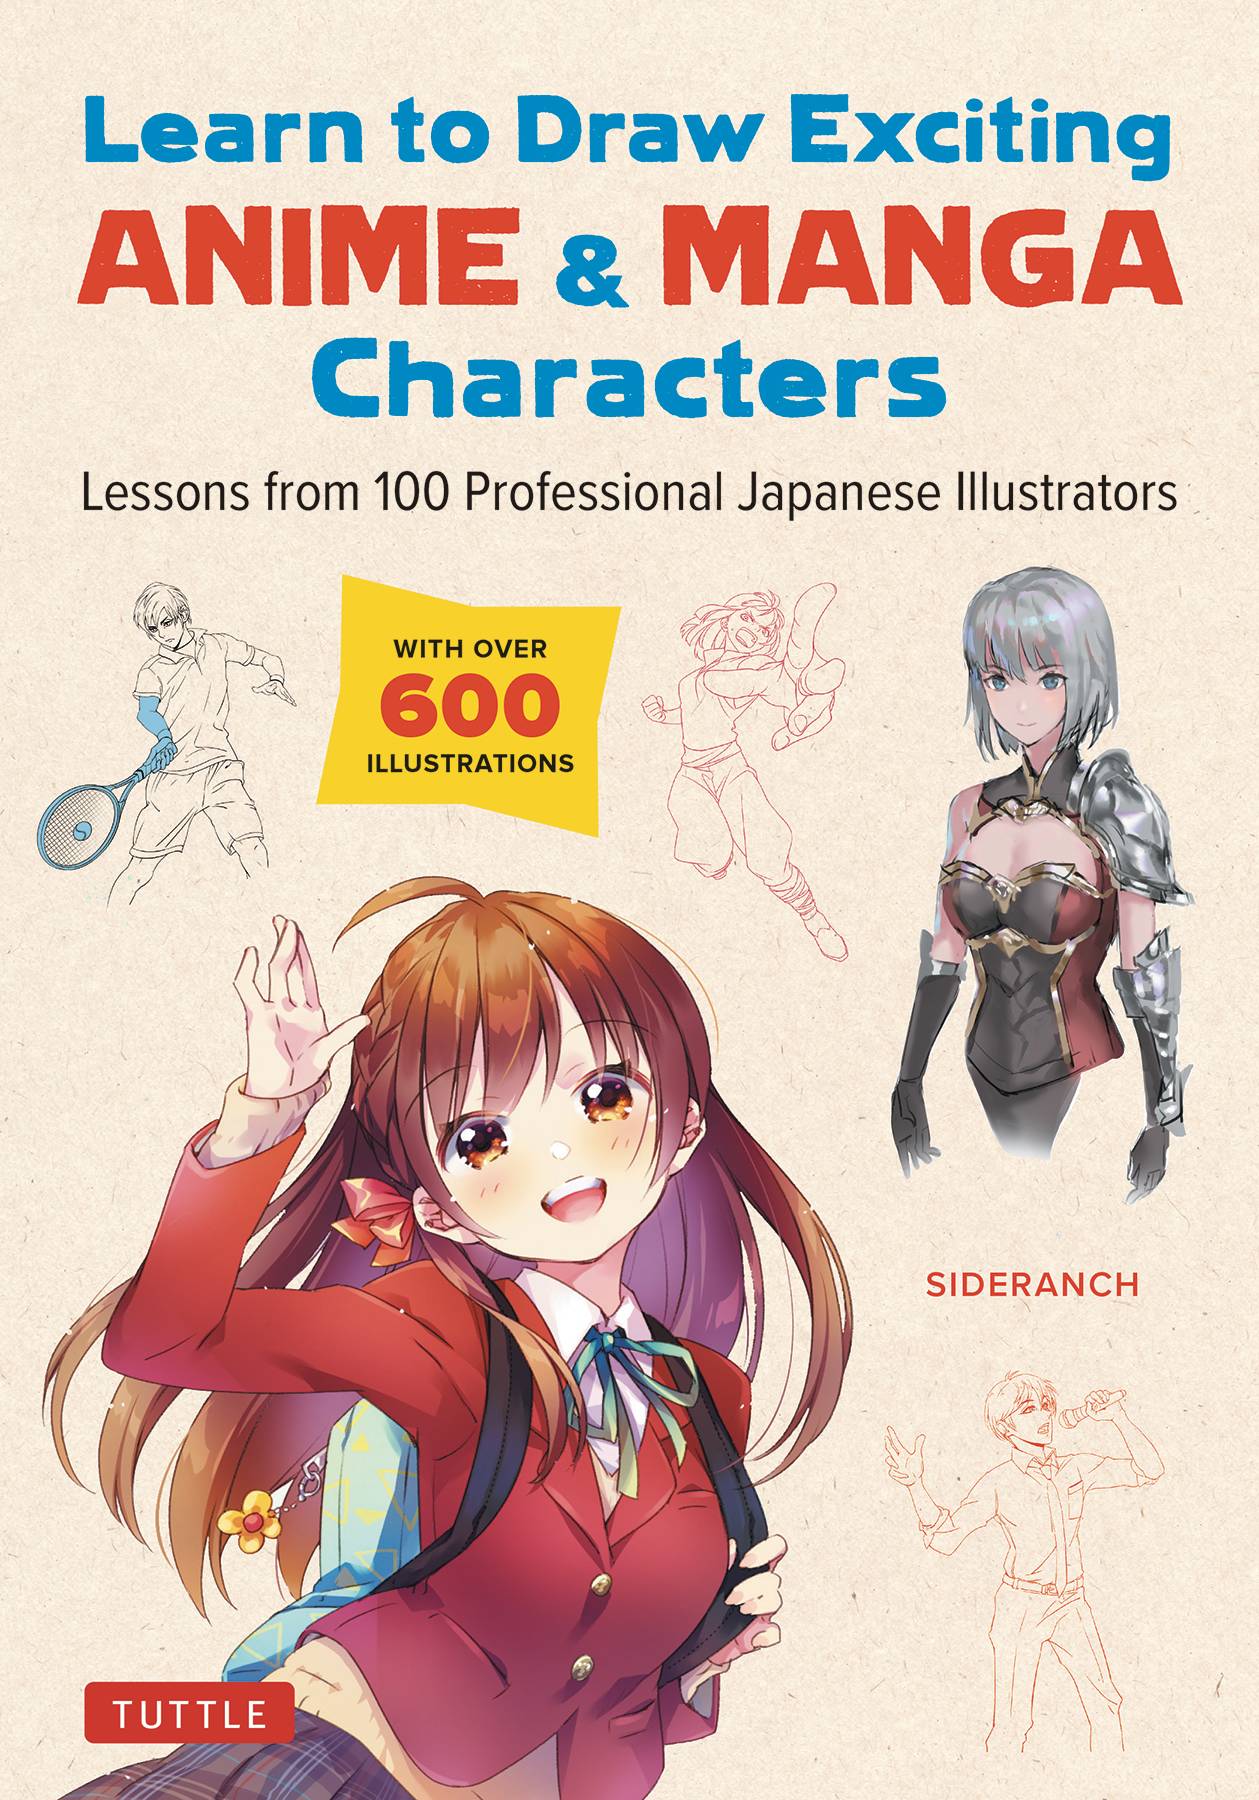 LEARN TO DRAW EXCITING ANIME & MANGA CHARACTERS SC